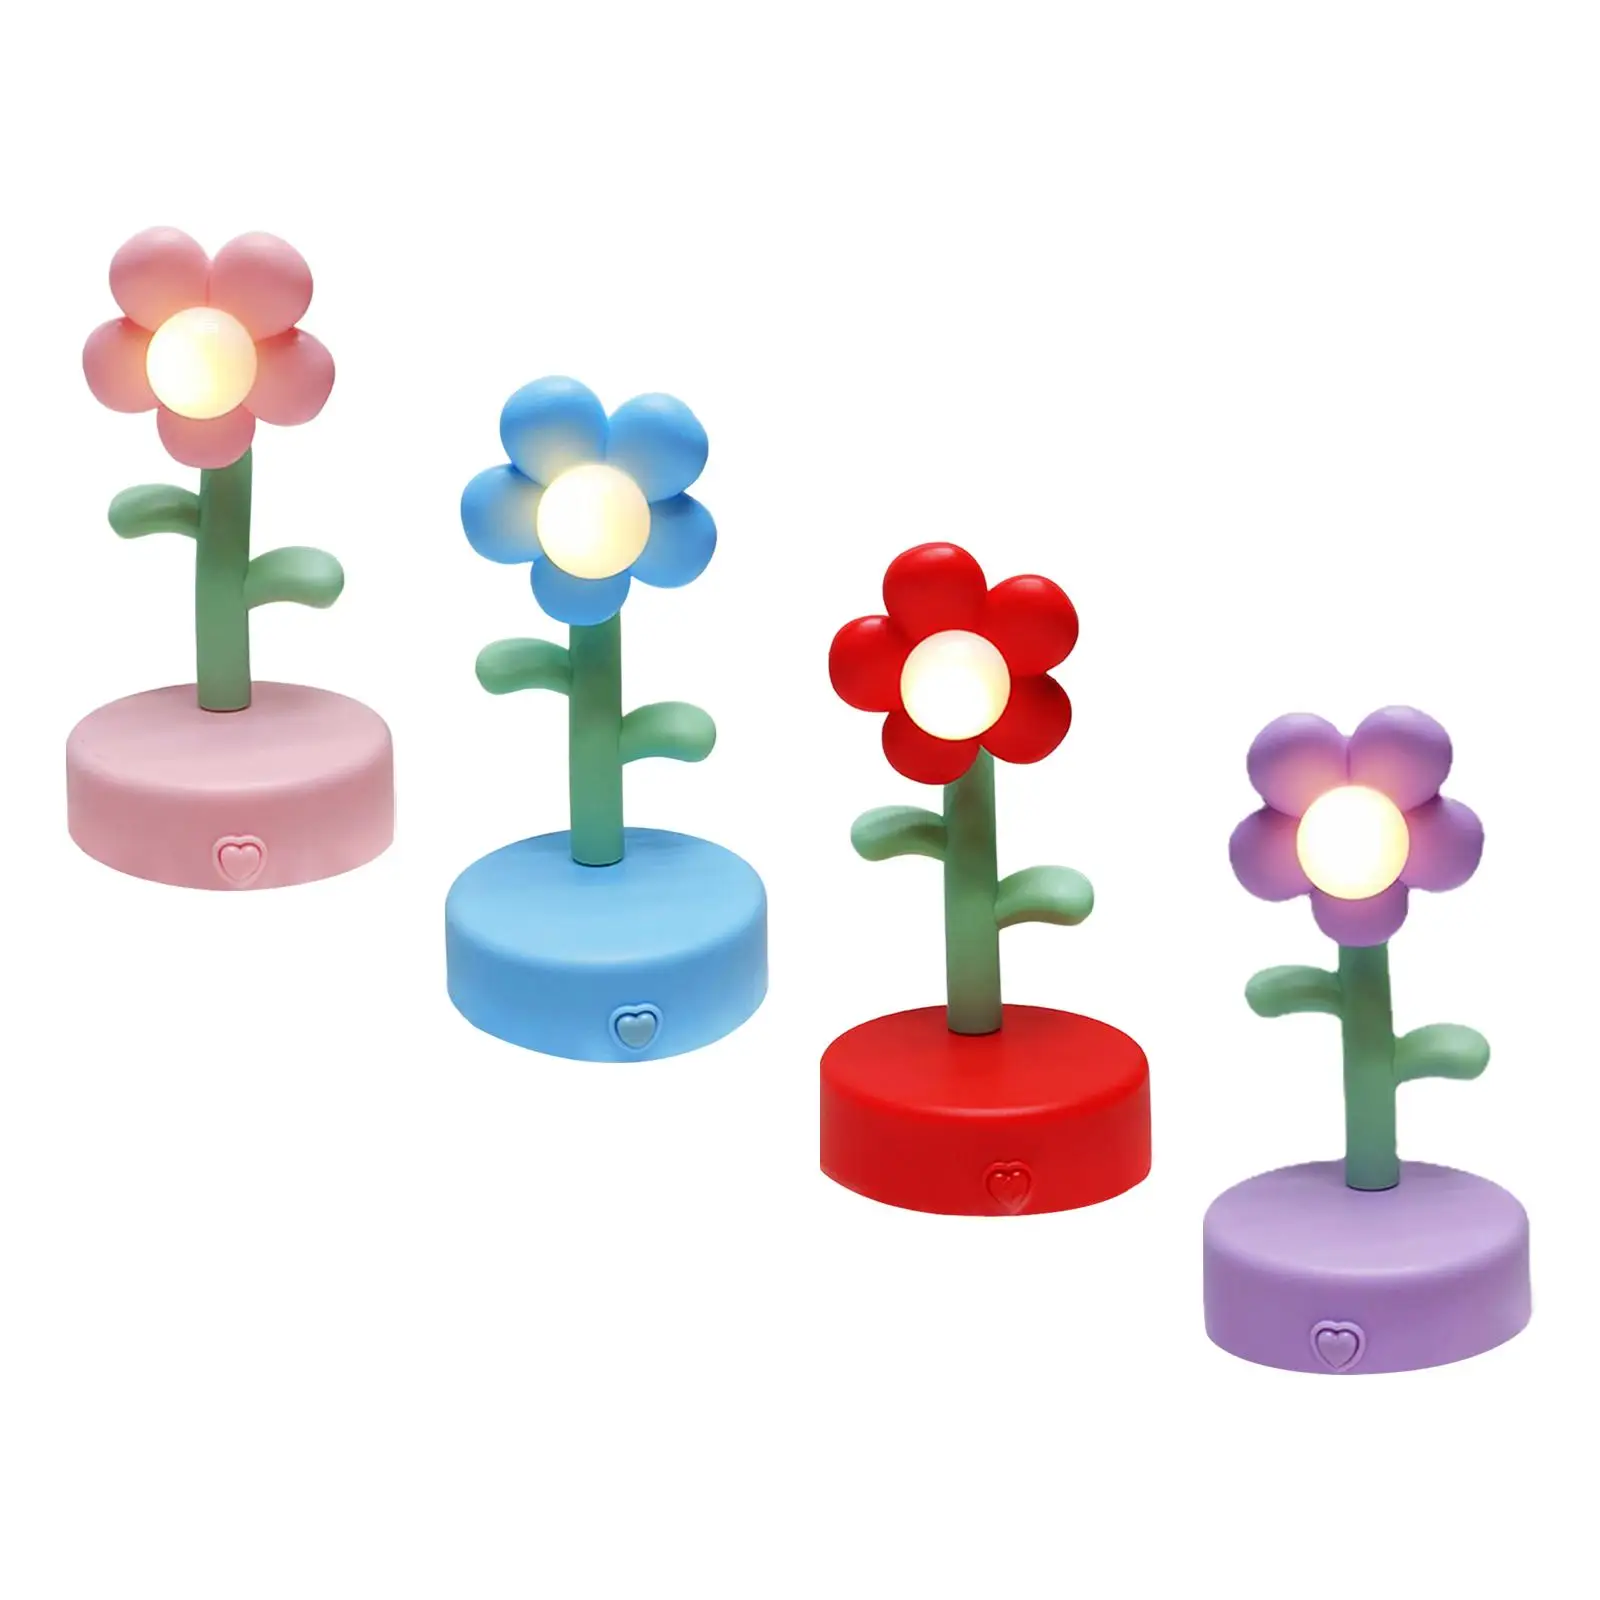 Creative Flower Table Lamp Night Light Portable Decorative Desk Lamp for Party Wedding Bedroom Decoration Birthday Gift